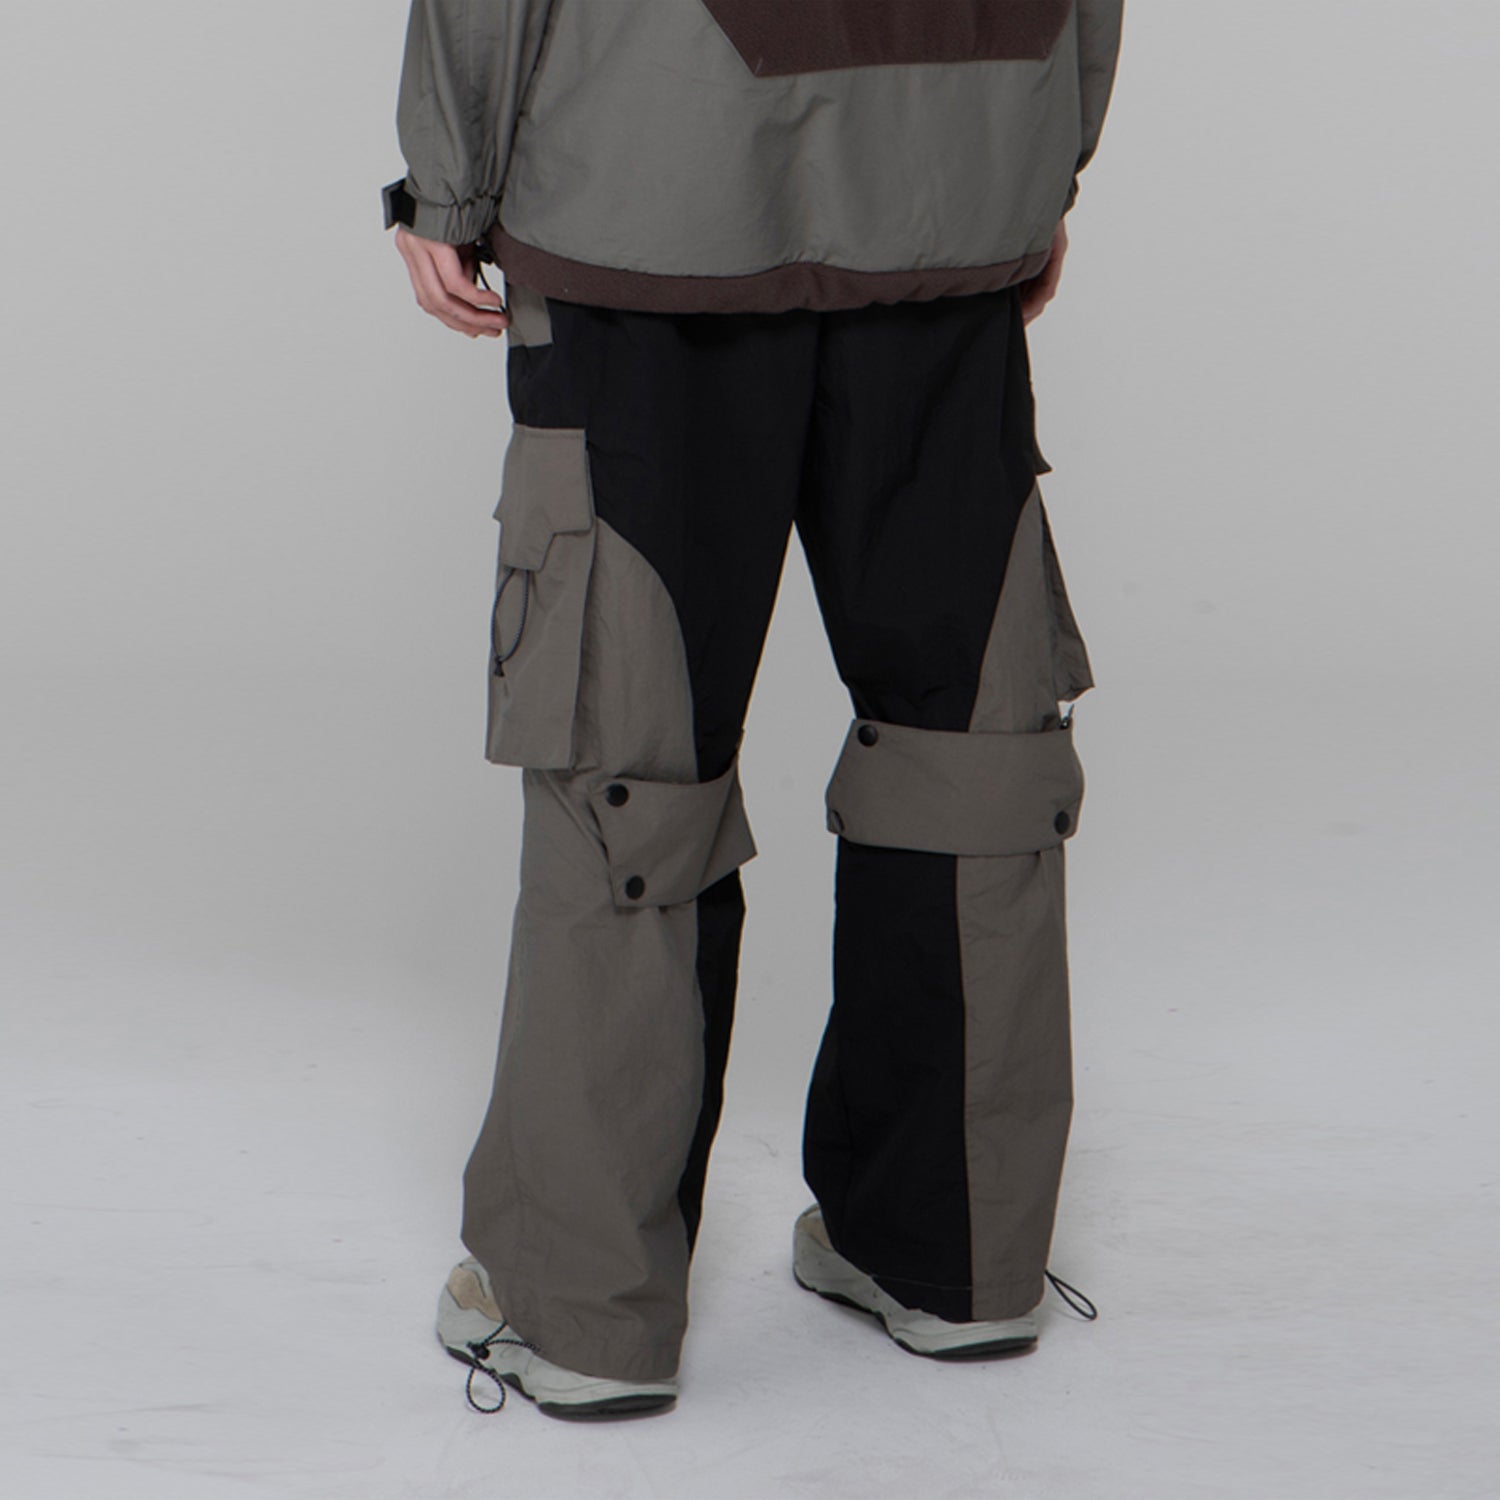 Snap on-off cargo pants